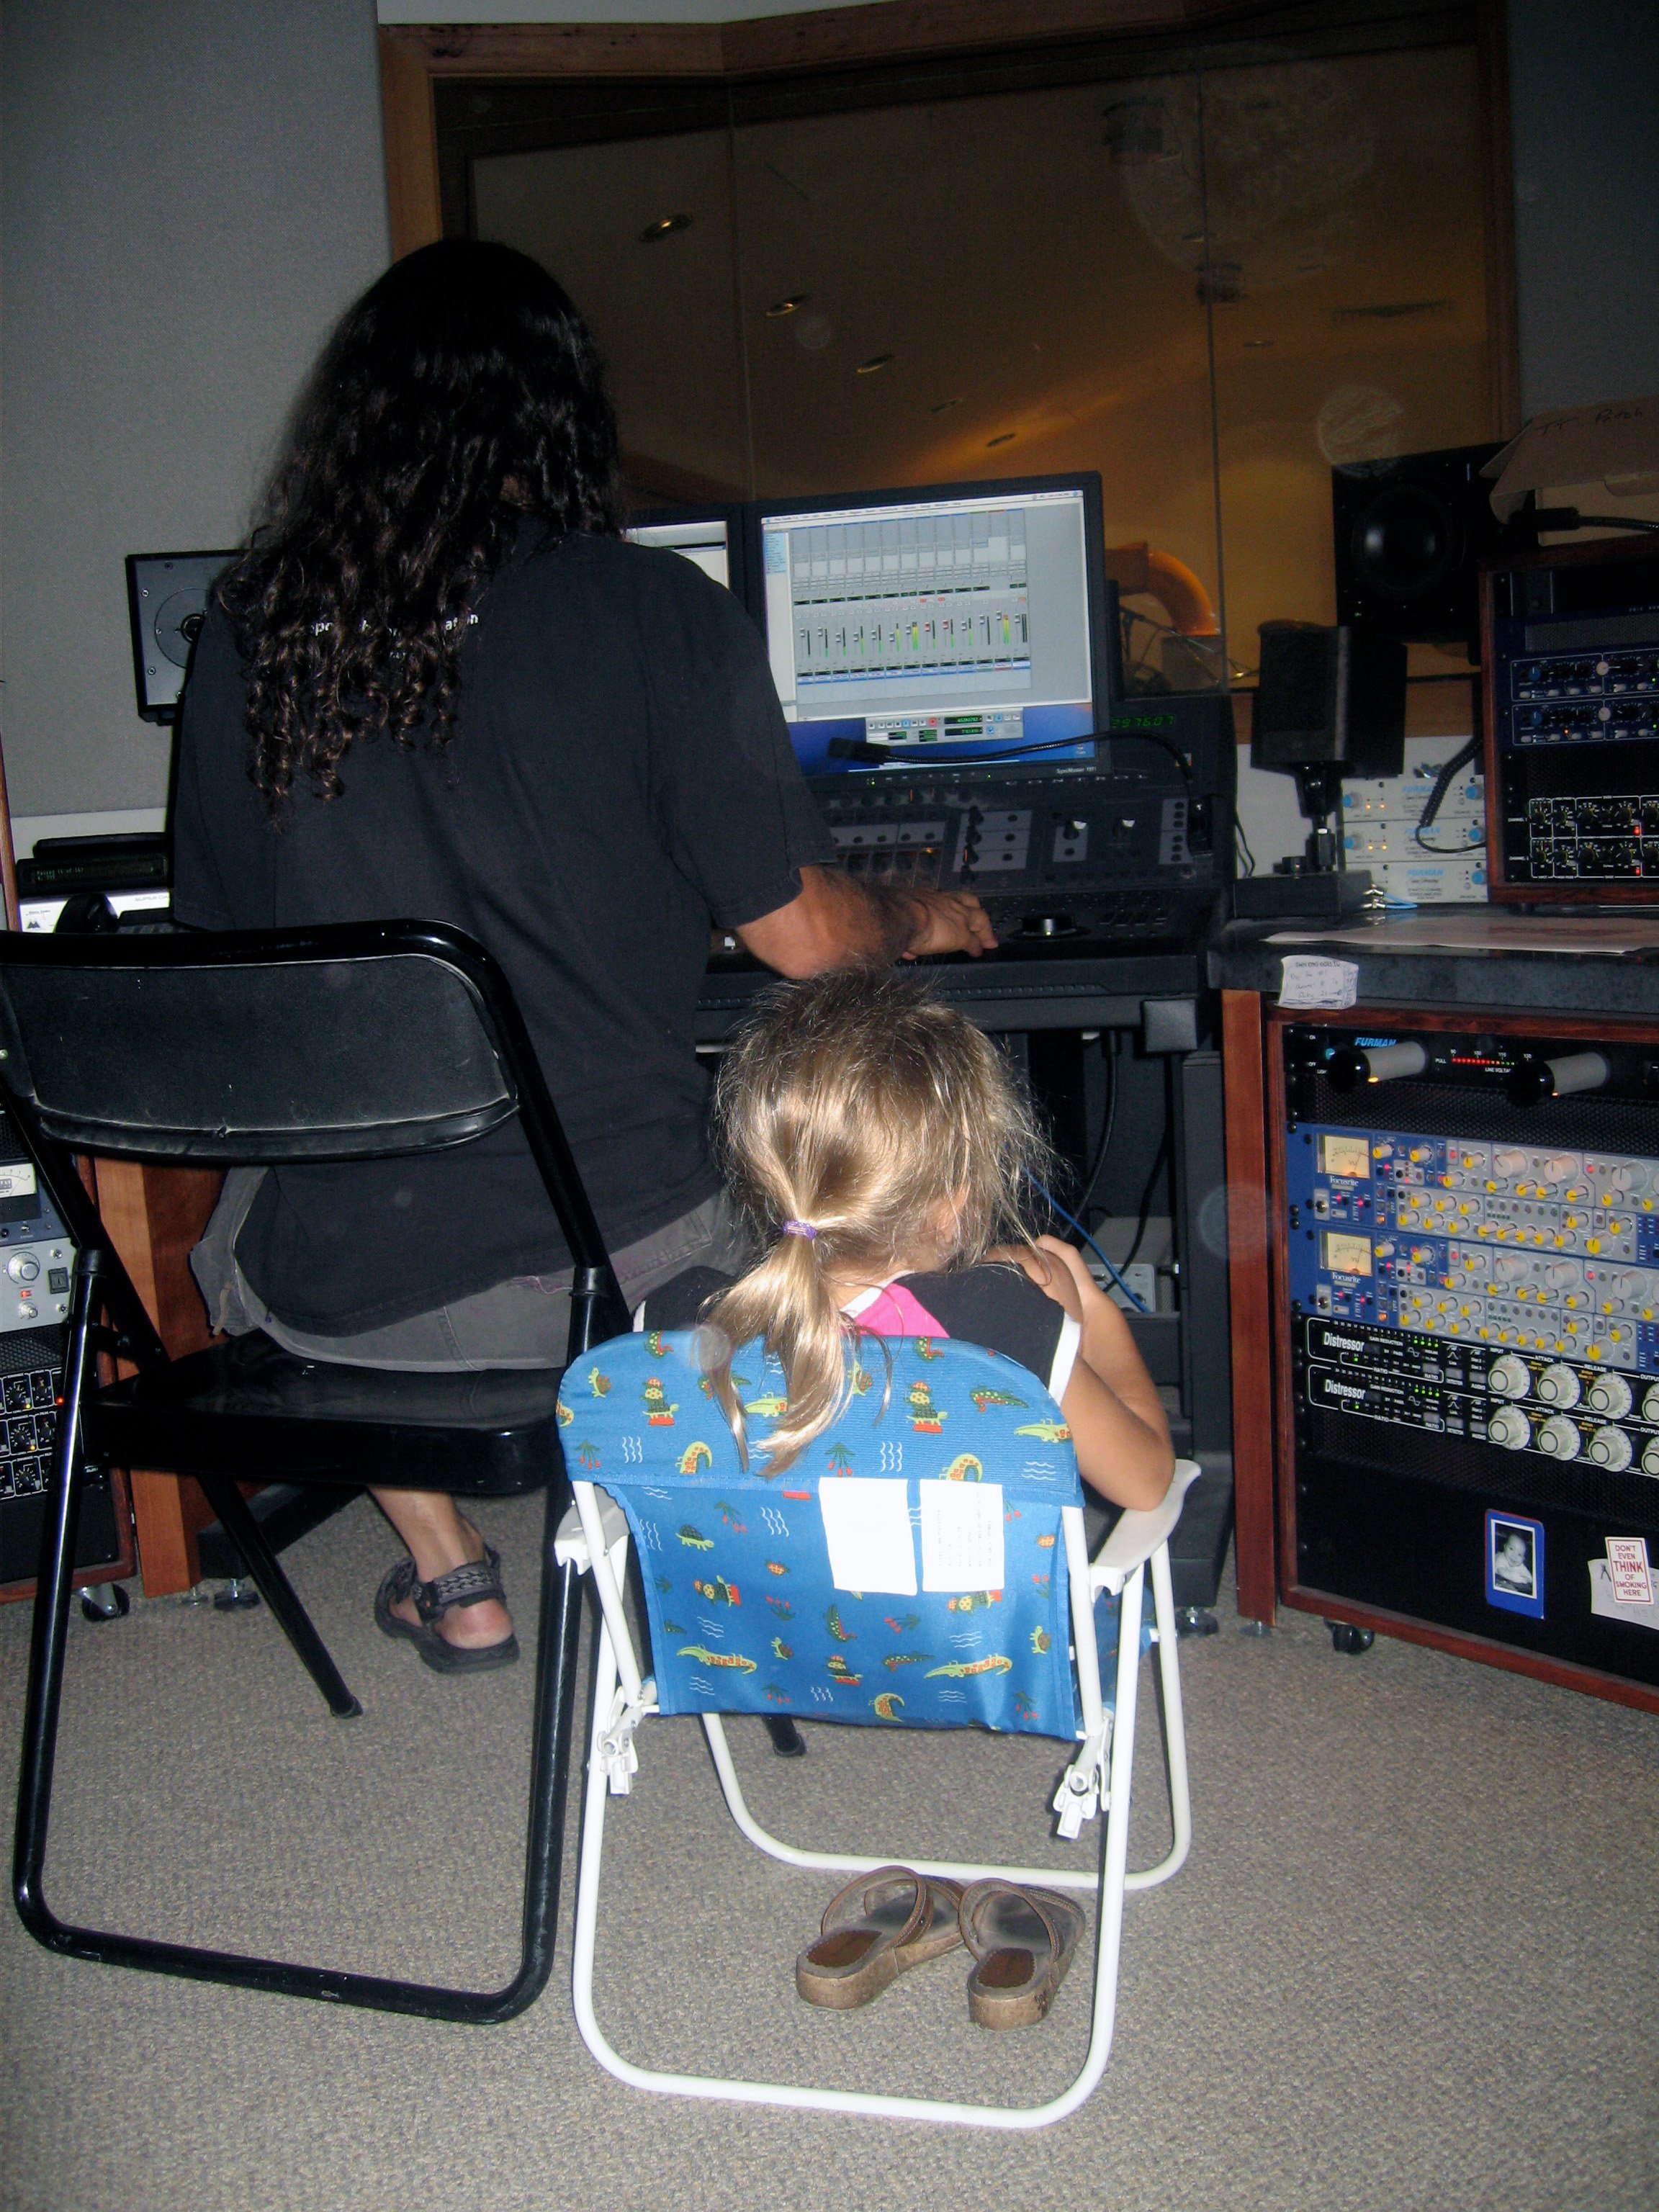 Crack production team of David and daughter hard at work.